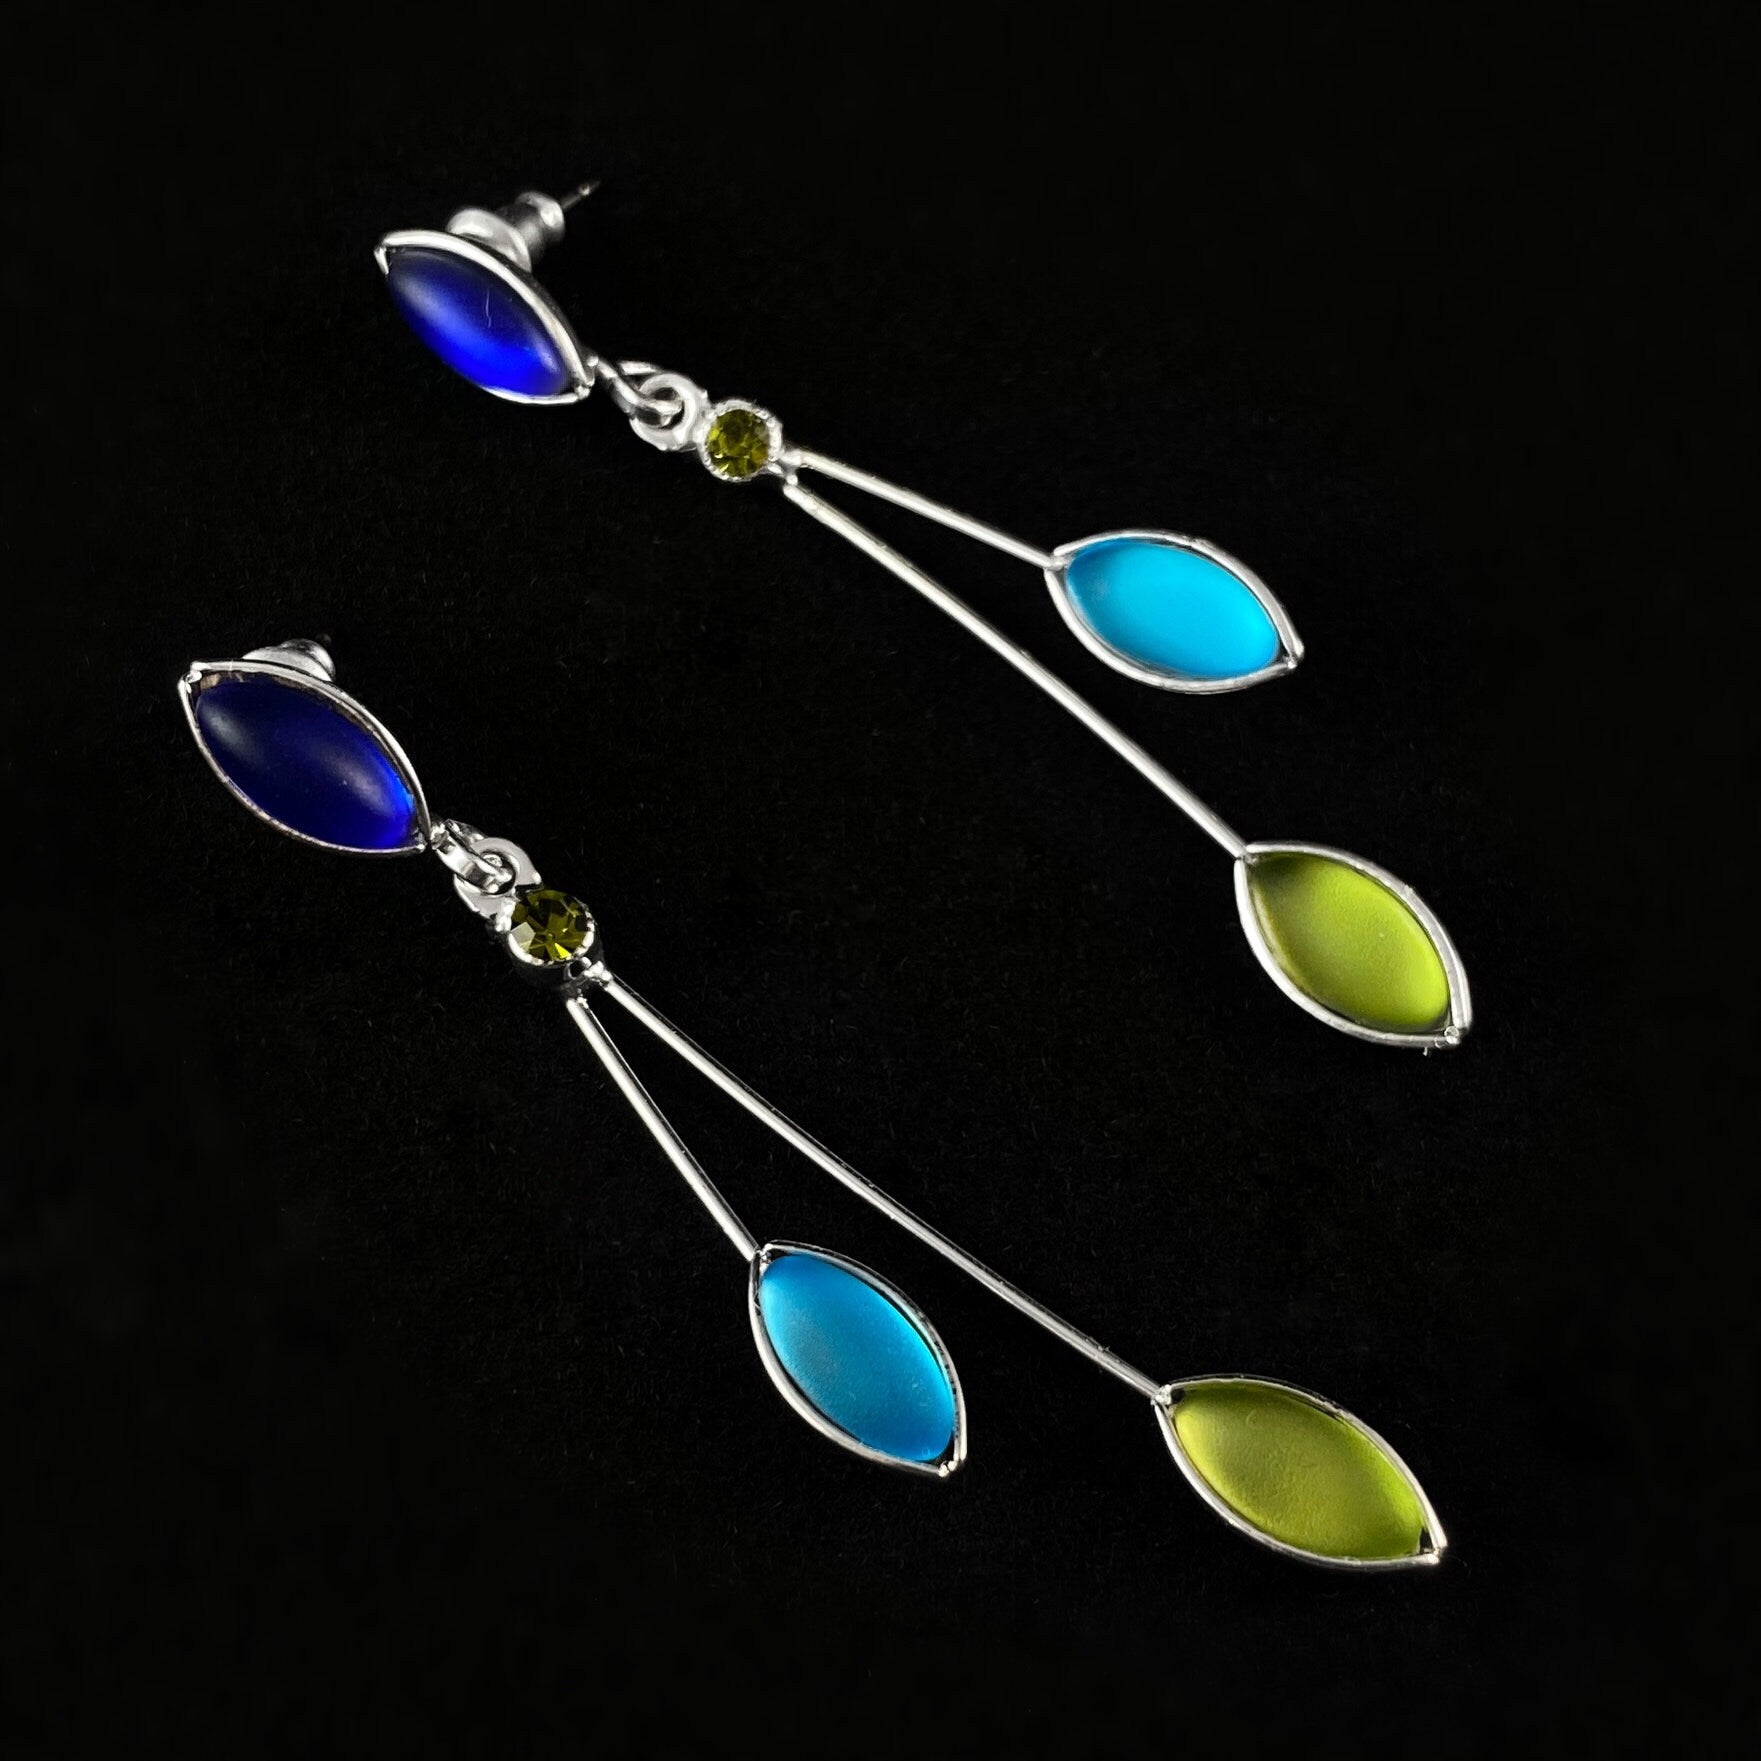 Floral Style Earrings with Silver Wire and Handmade Glass Beads, Hypoallergenic, Aqua/Sapphire/Olive Green - Kristina